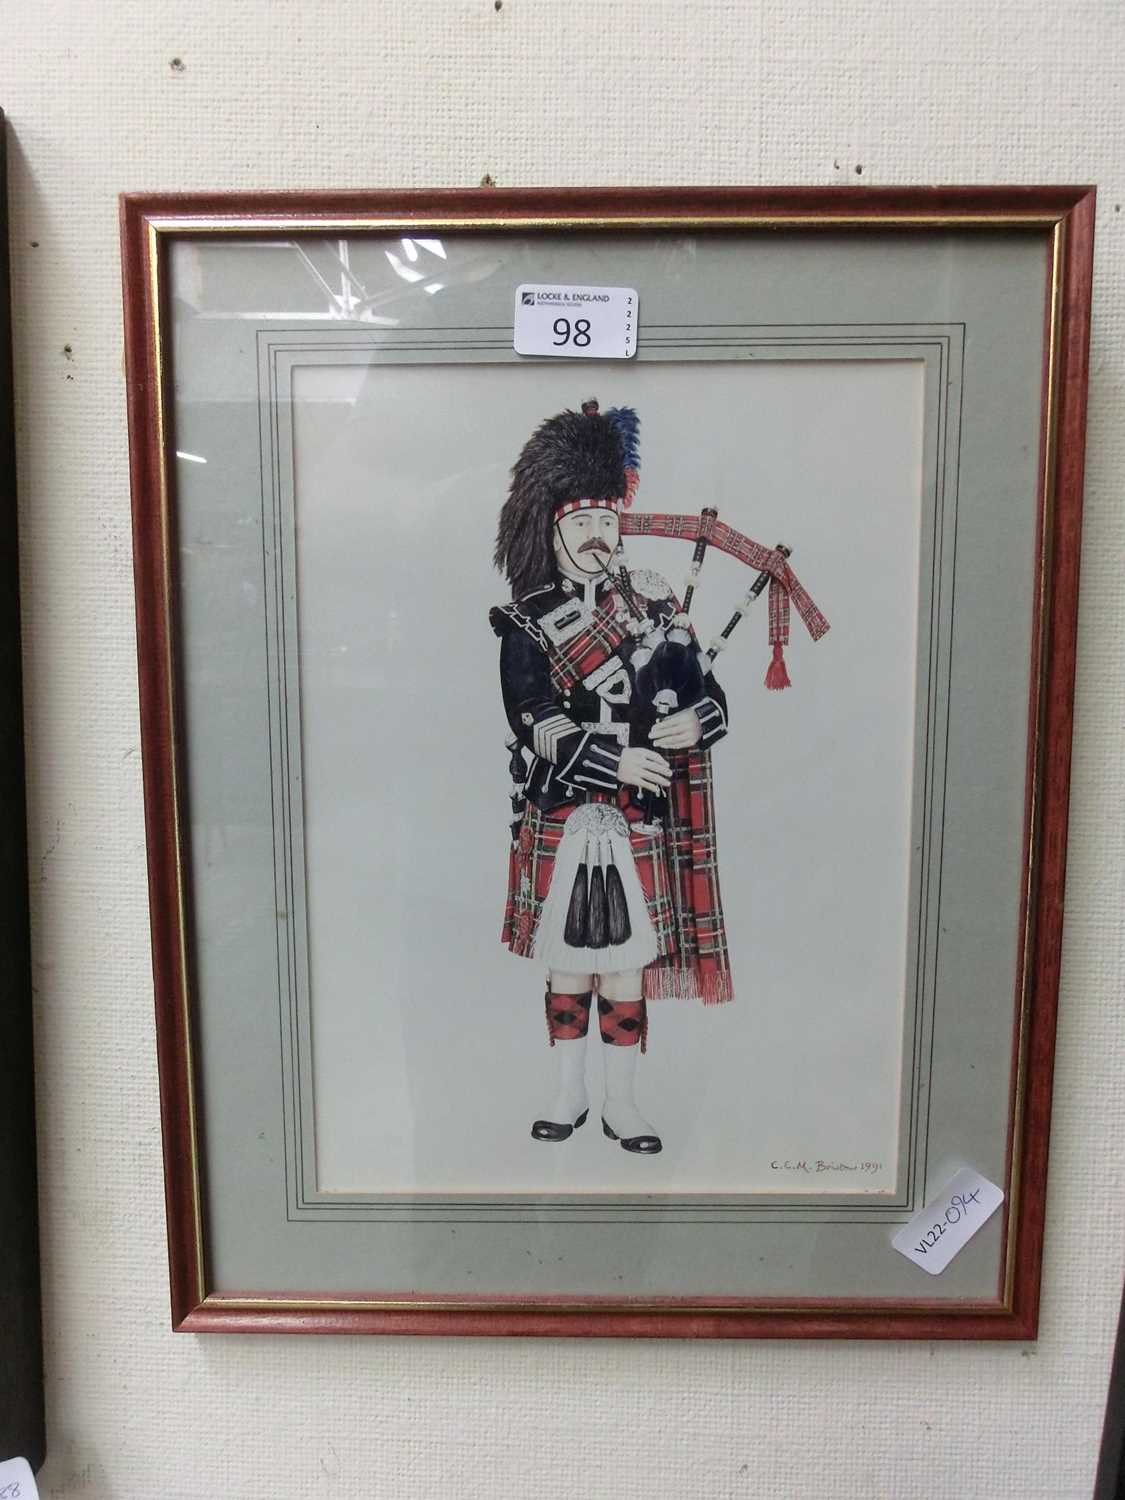 A framed and glazed pen and ink drawing of bagpipe player signed C.C.M.Bristo